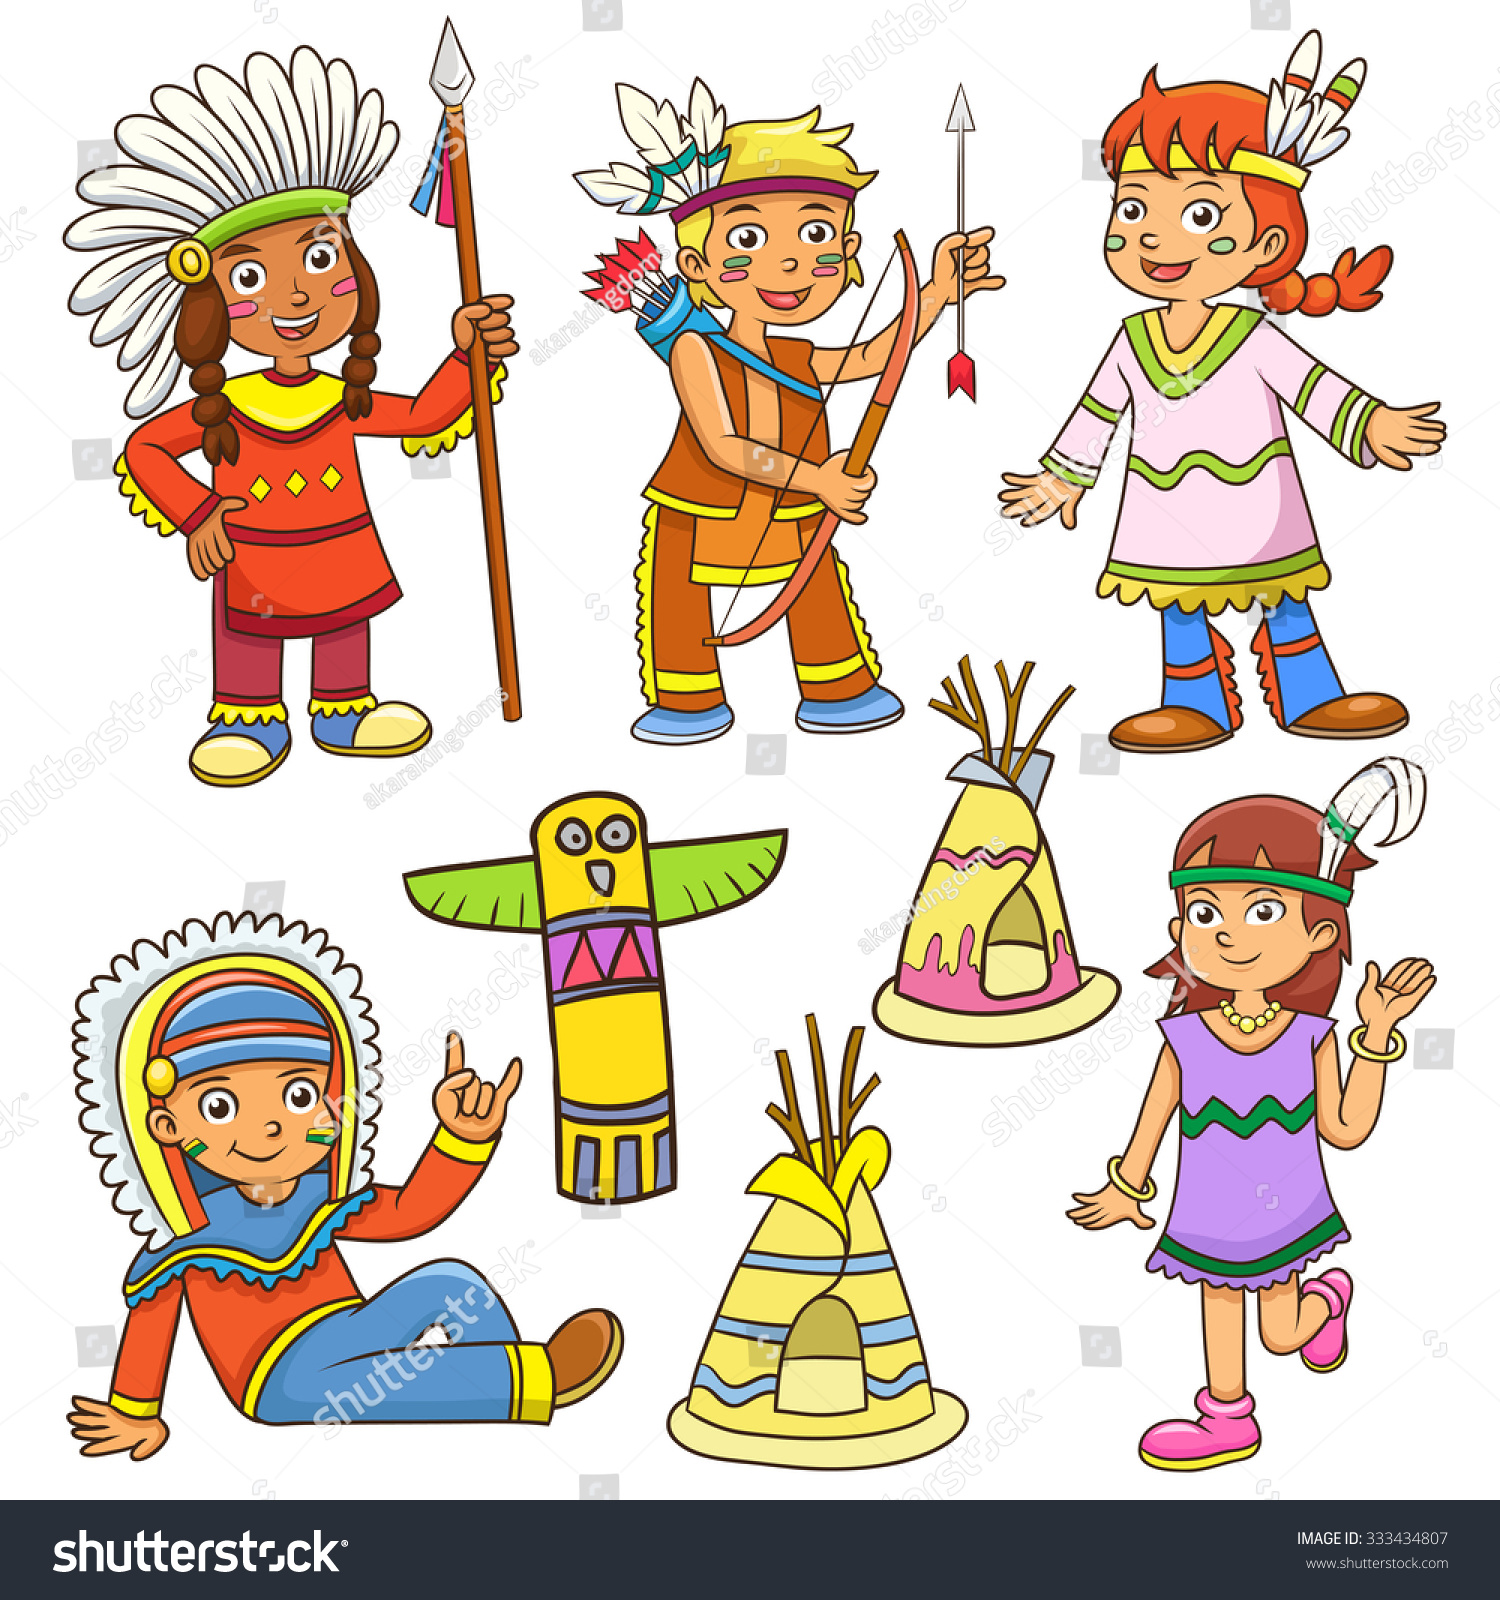 Illustration Red Indian Cartooneps10 File Simple 스톡 벡터 333434807